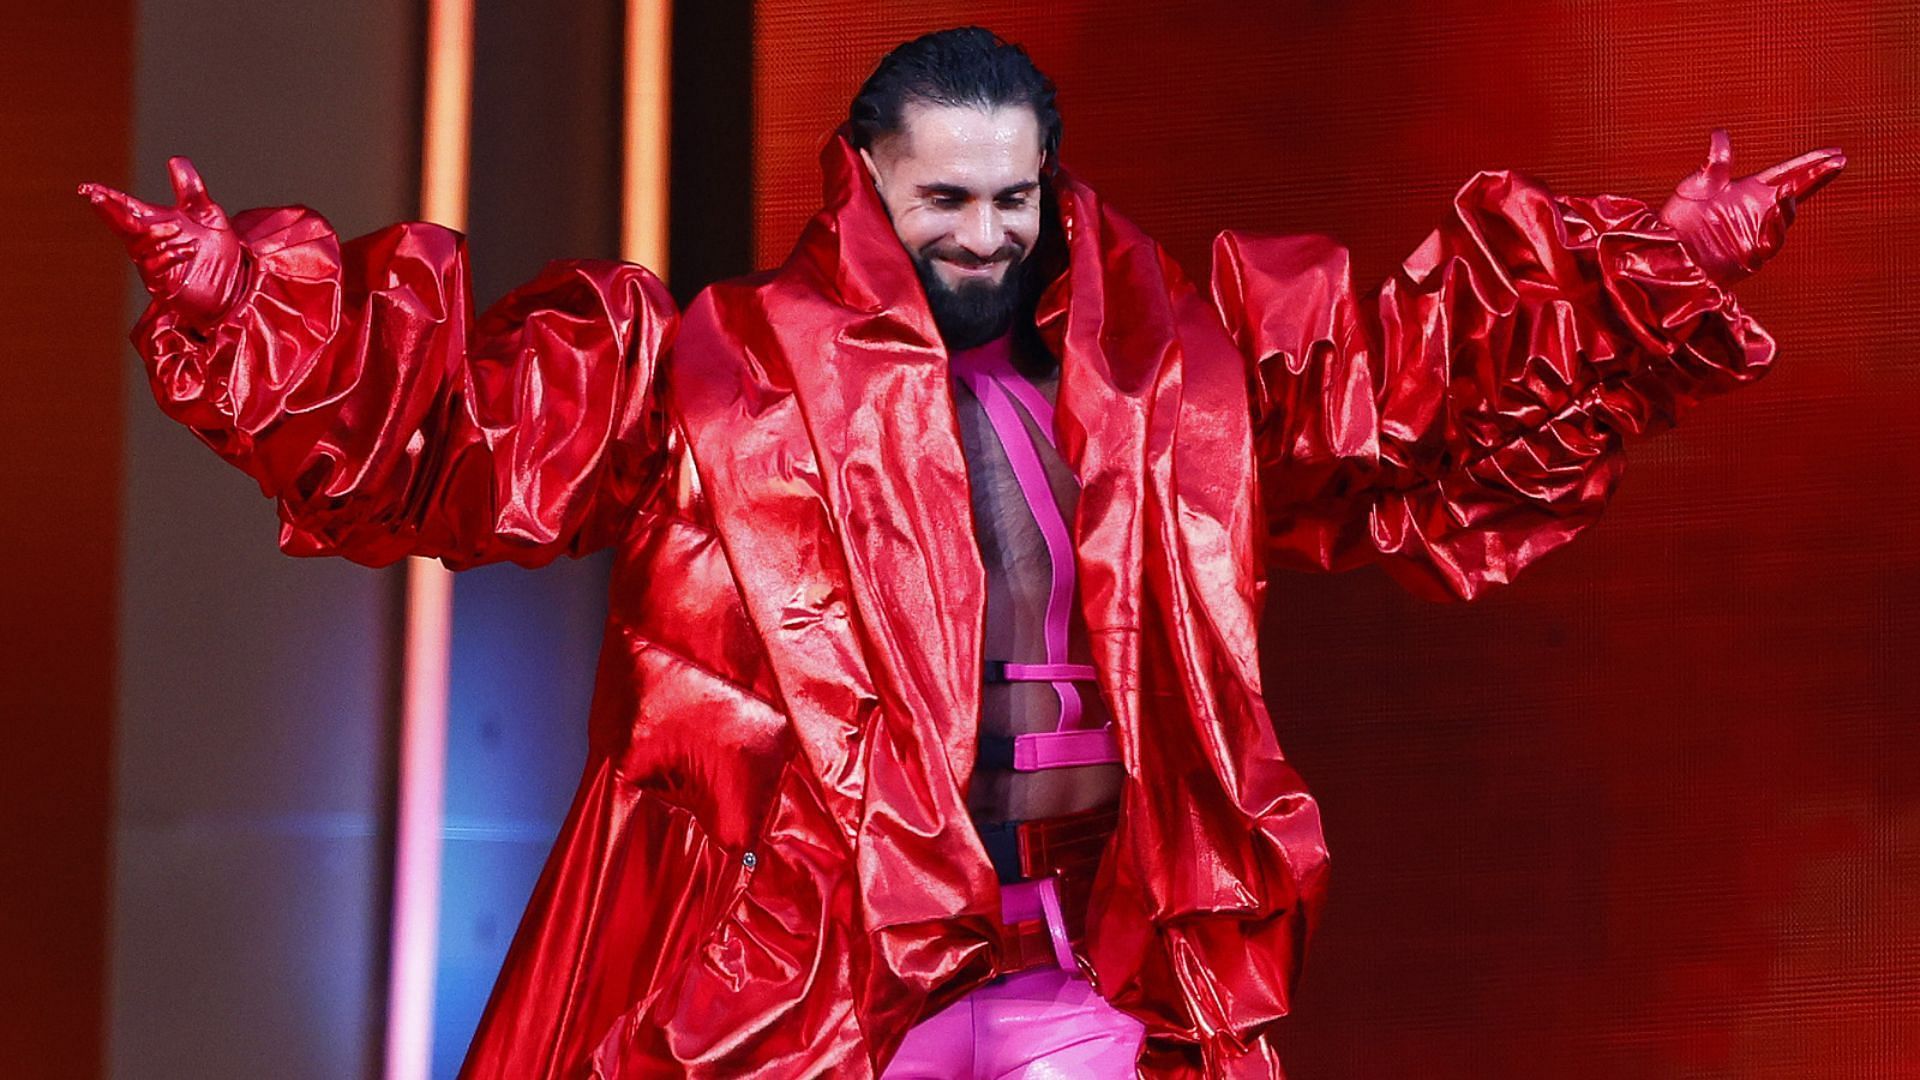 Does Seth Rollins need backup to take on Finn Balor at WWE SummerSlam?